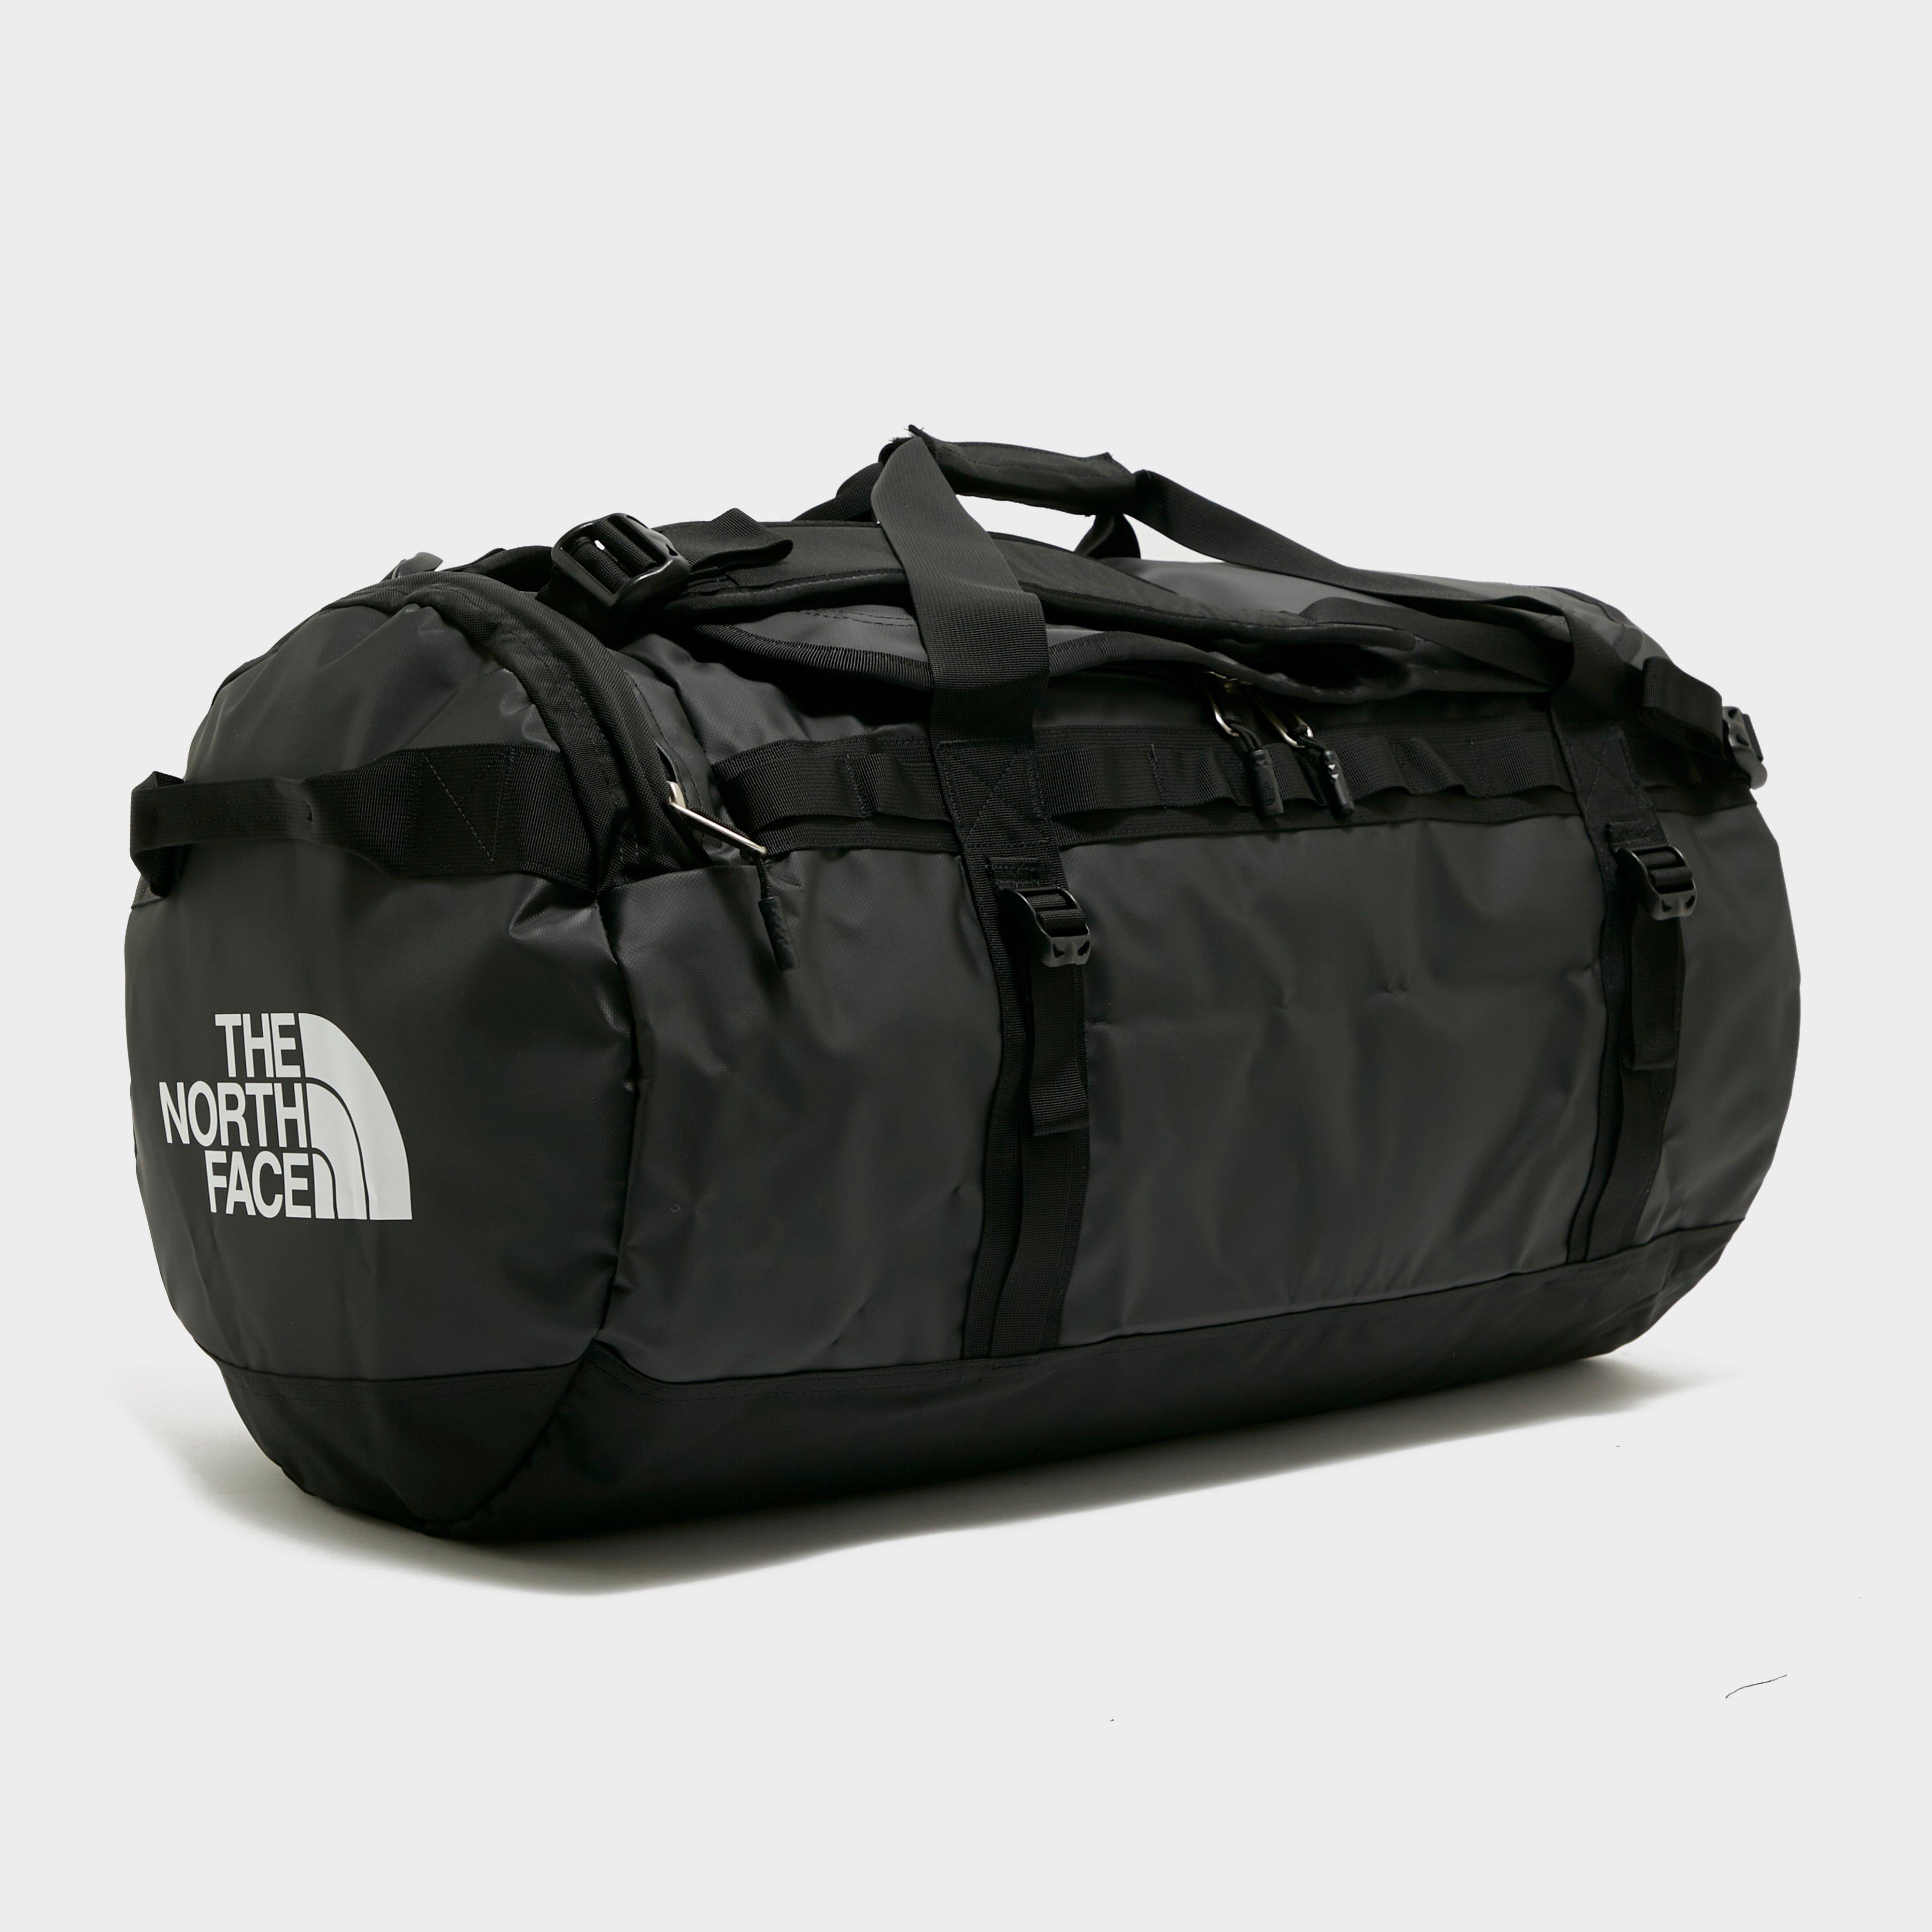 The North Face The North Face Base Camp Large Duffel Bag - Black, Black